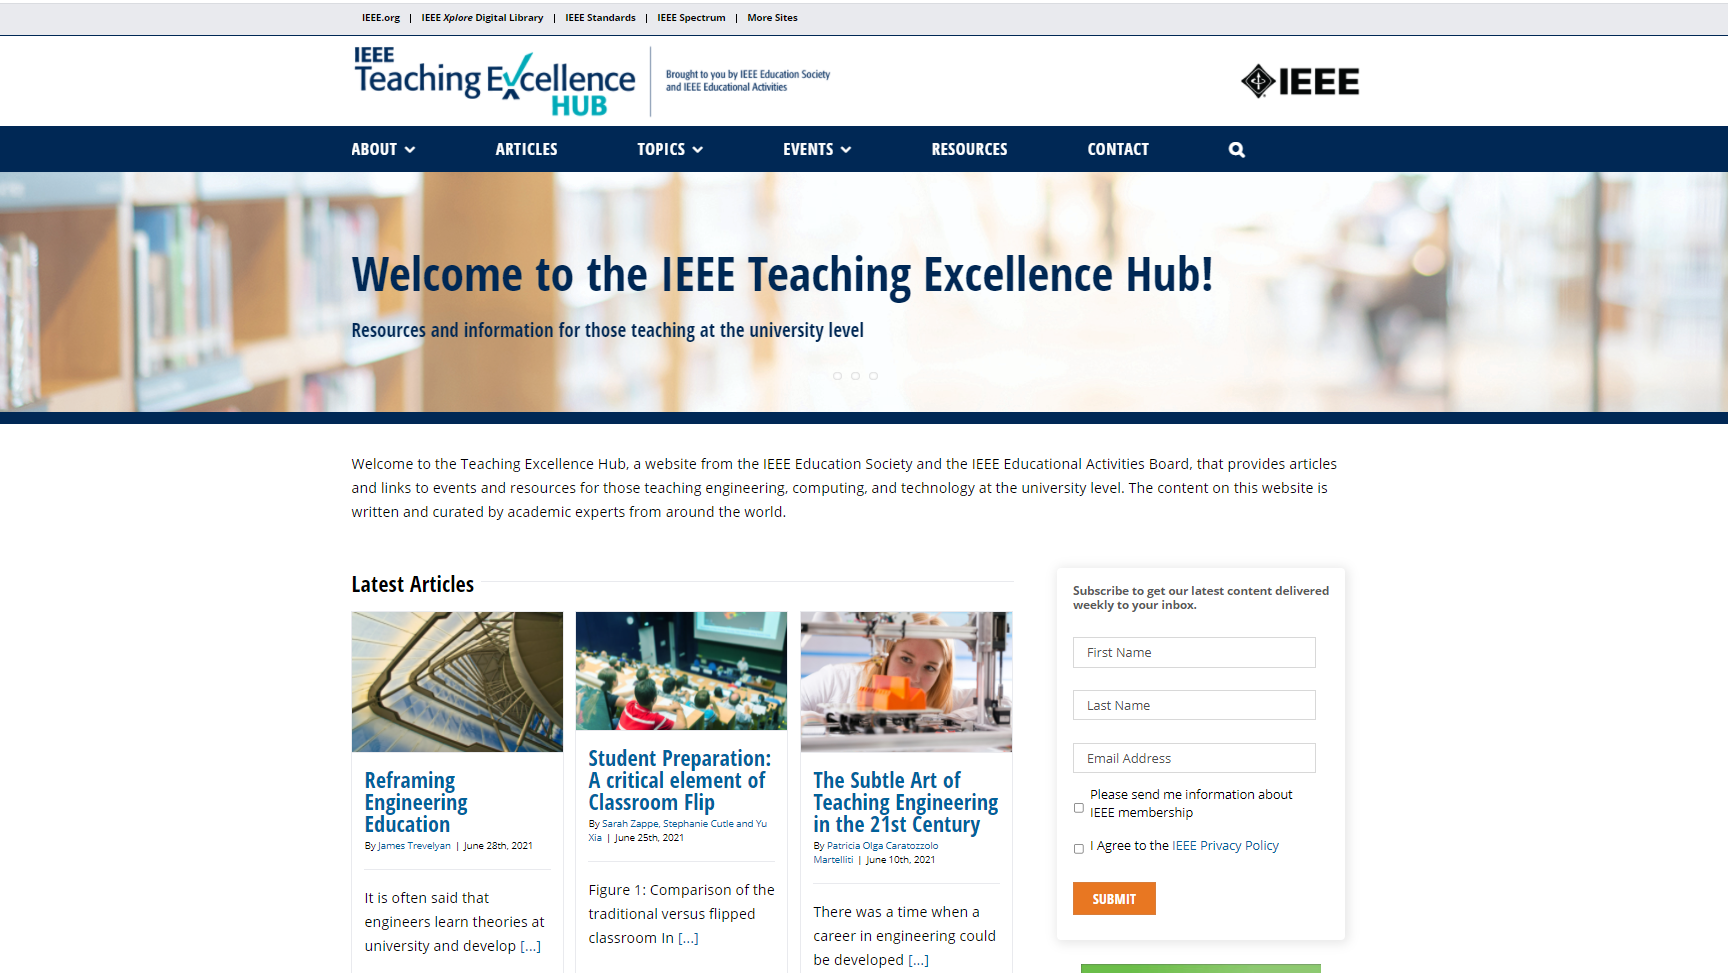 image showing the home page of the teaching excellence hub website